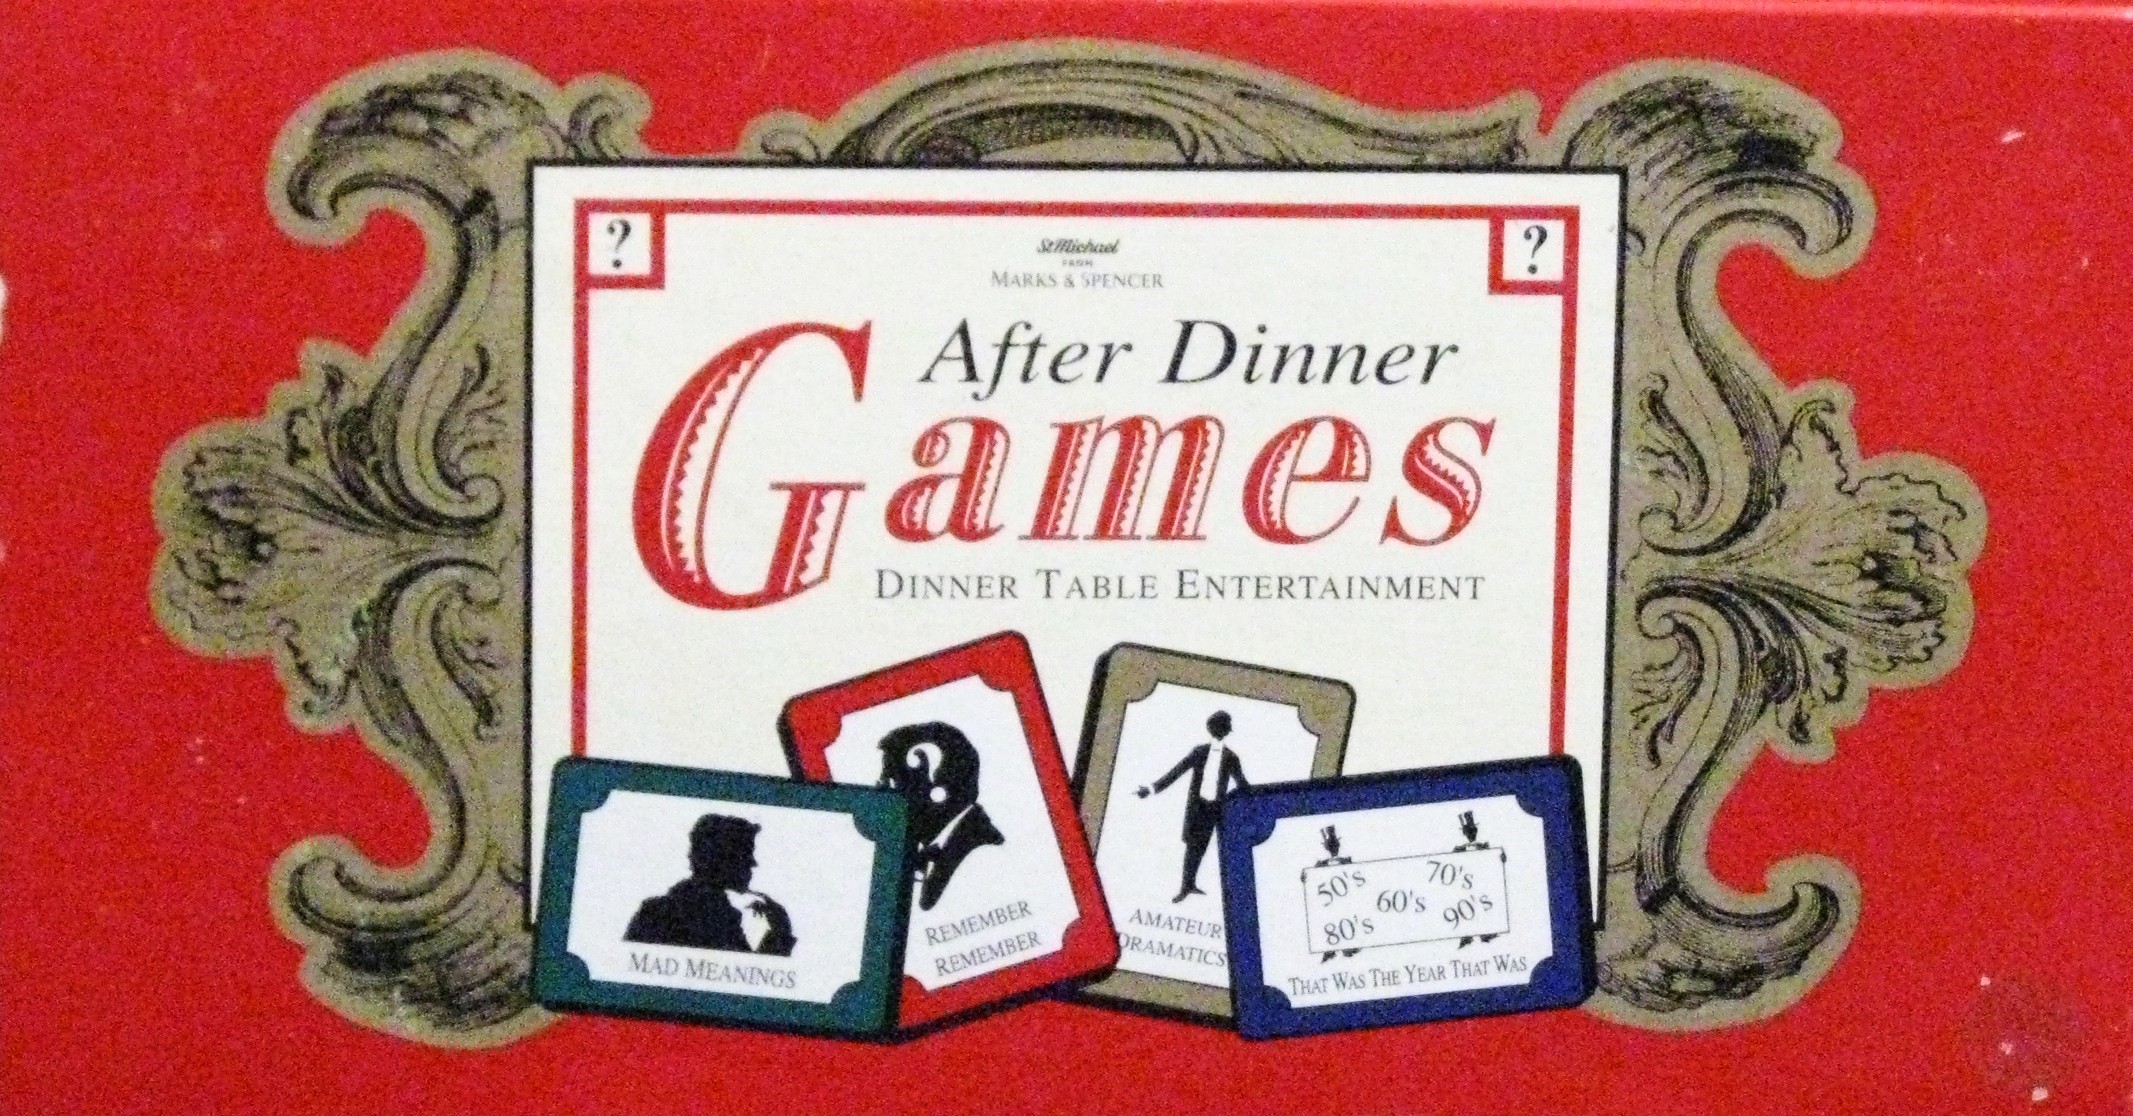 After dinner games at the table